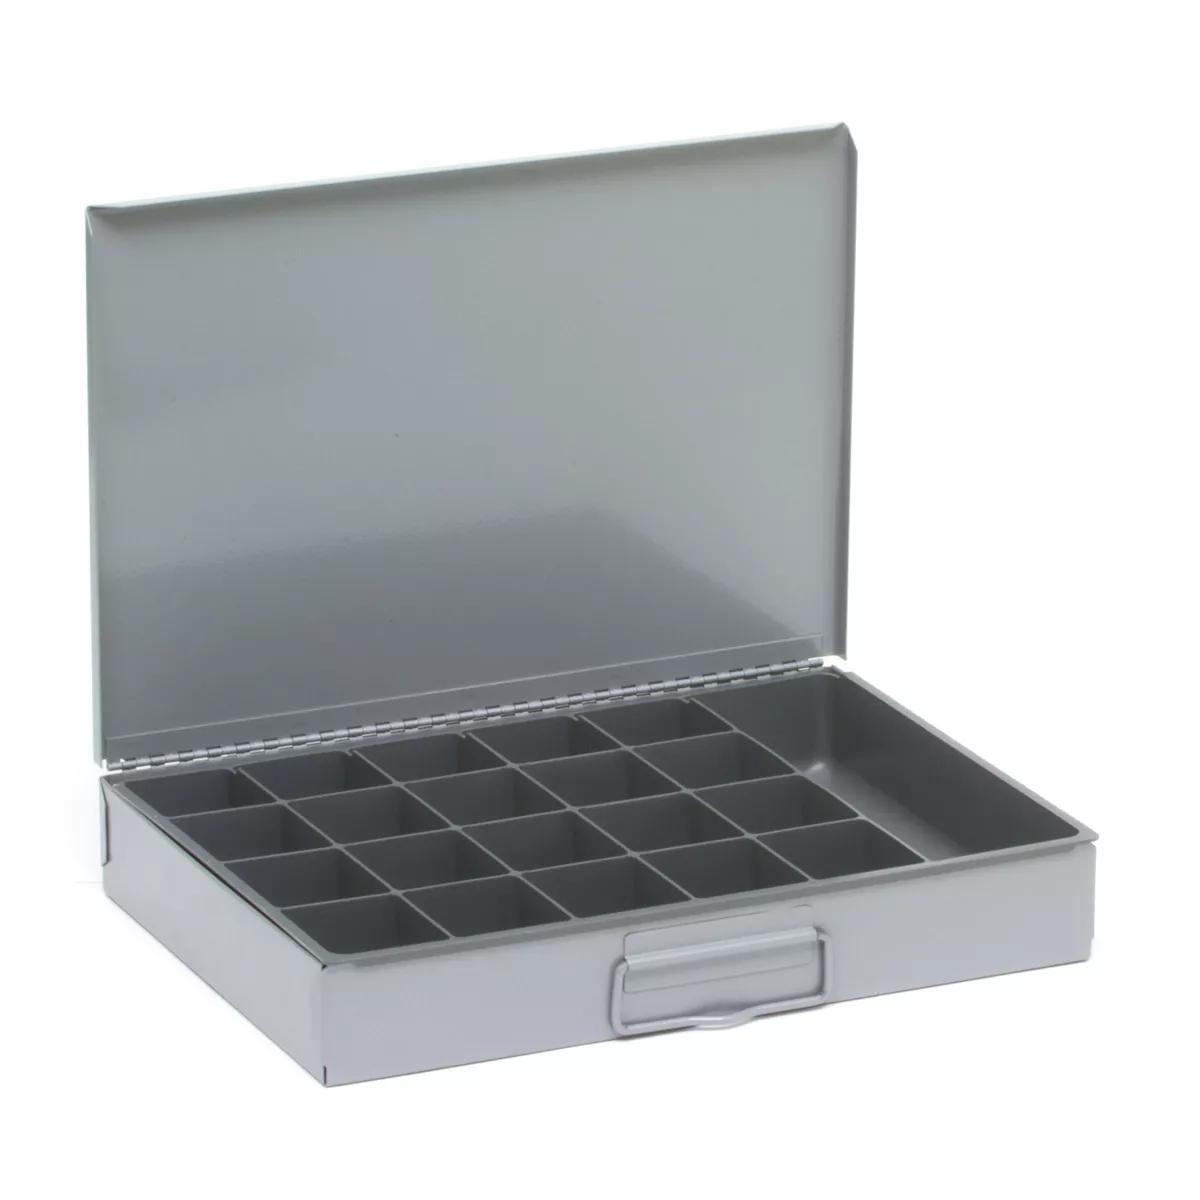 21 Compartment Small Drawer